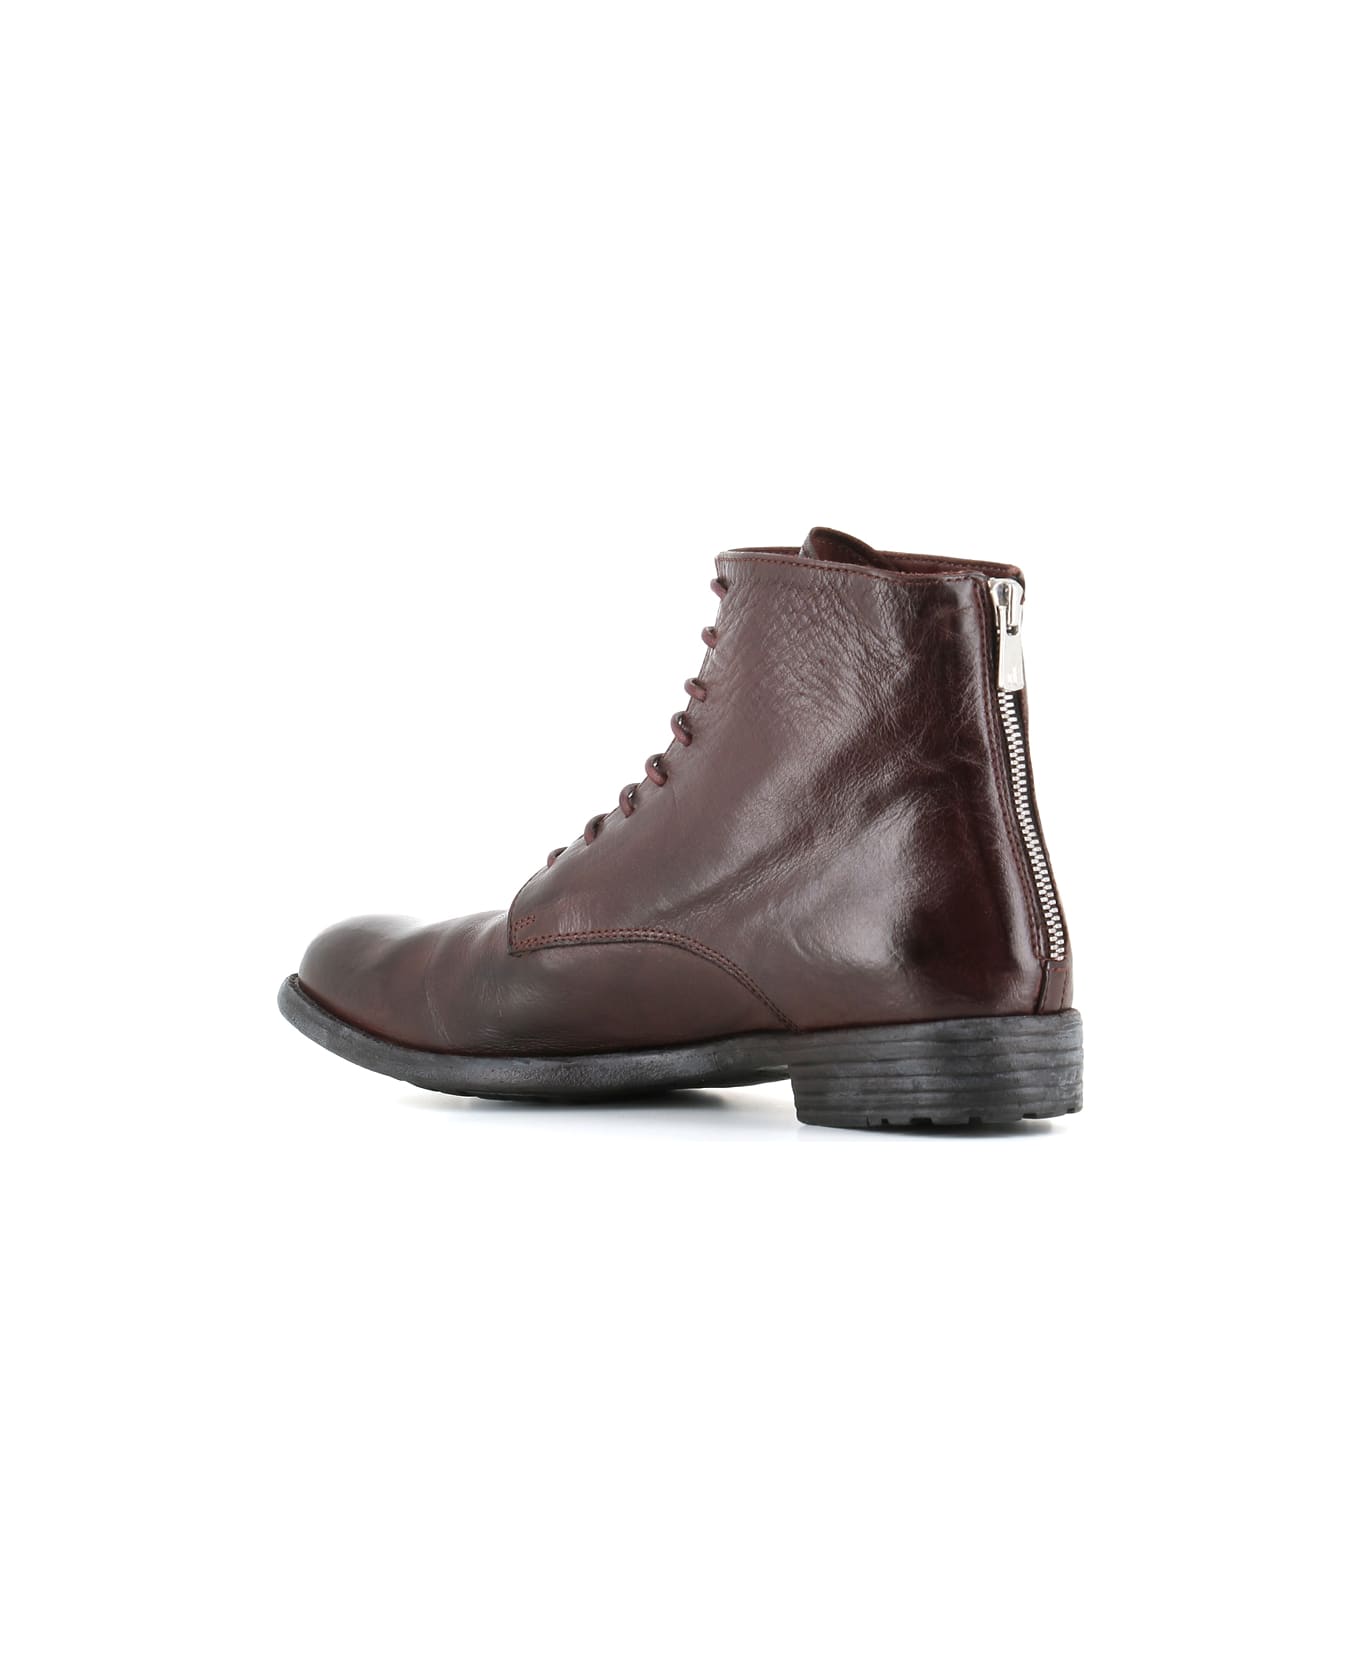 Officine Creative Lace-up Boots Mars/007 - Brown ブーツ